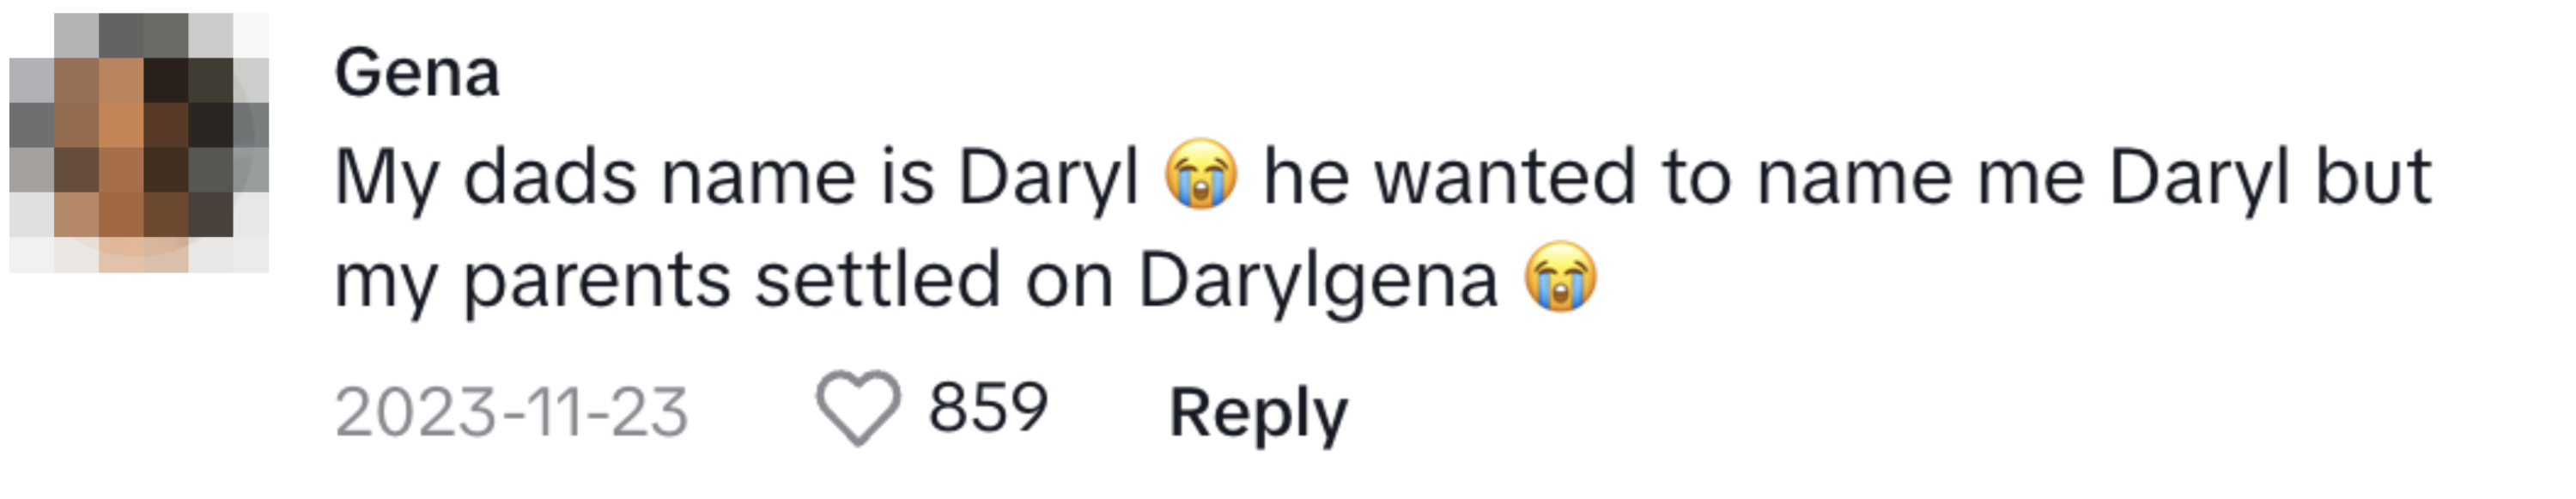 A commenter saying that their dad&#x27;s name is Daryl and he wanted to name them Daryl too, but instead their parents settled on Darylgena